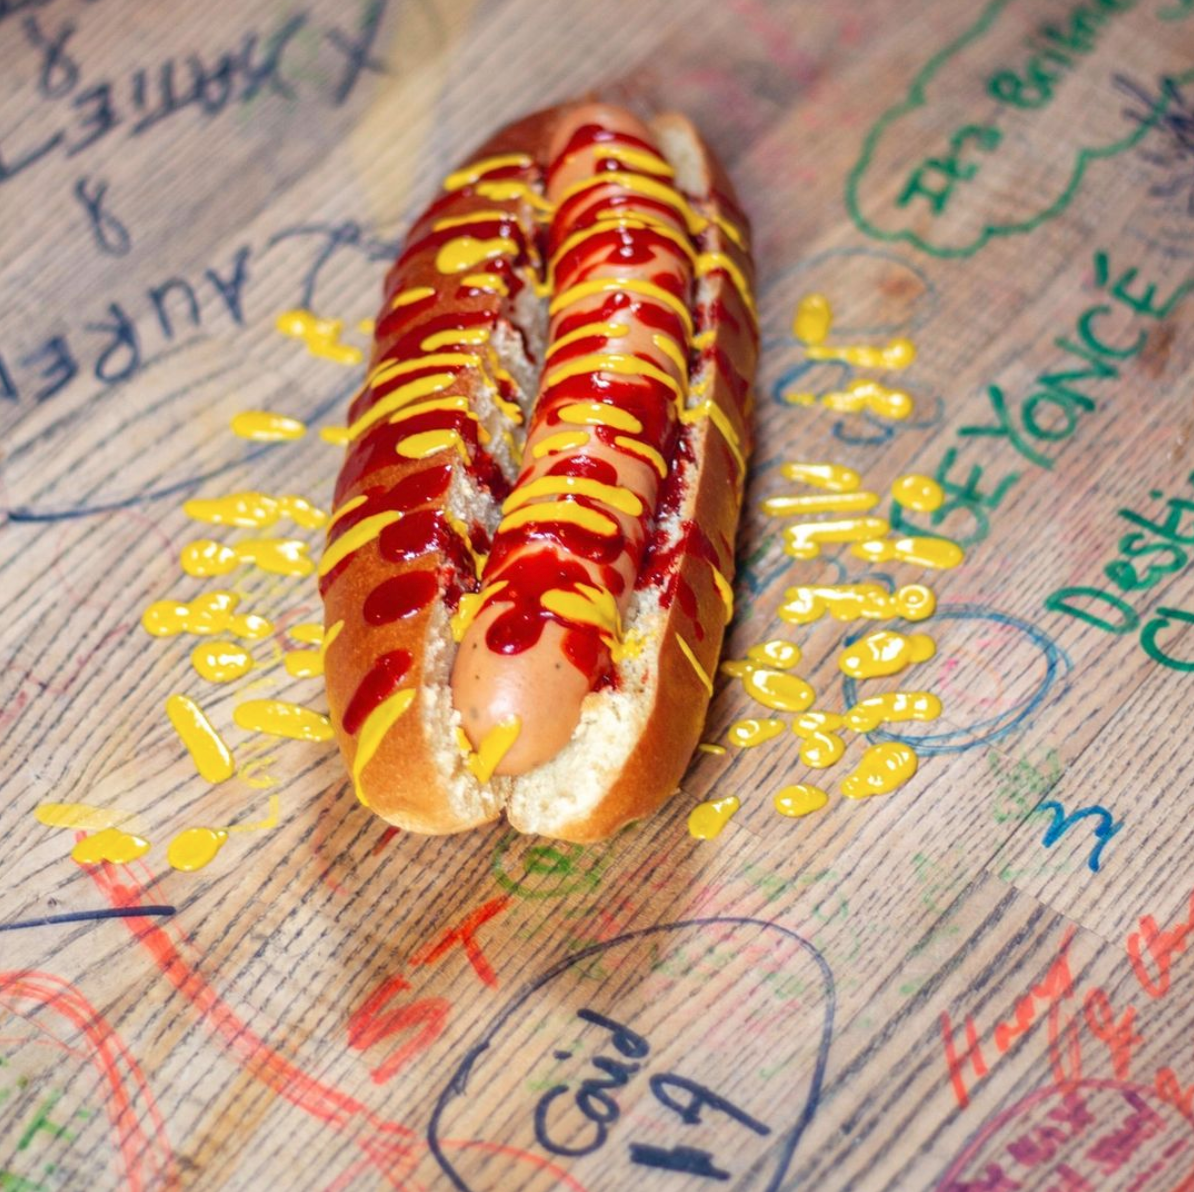 Manchester&#8217;s new dive bar Salt Dog Slims is opening its doors tomorrow, The Manc